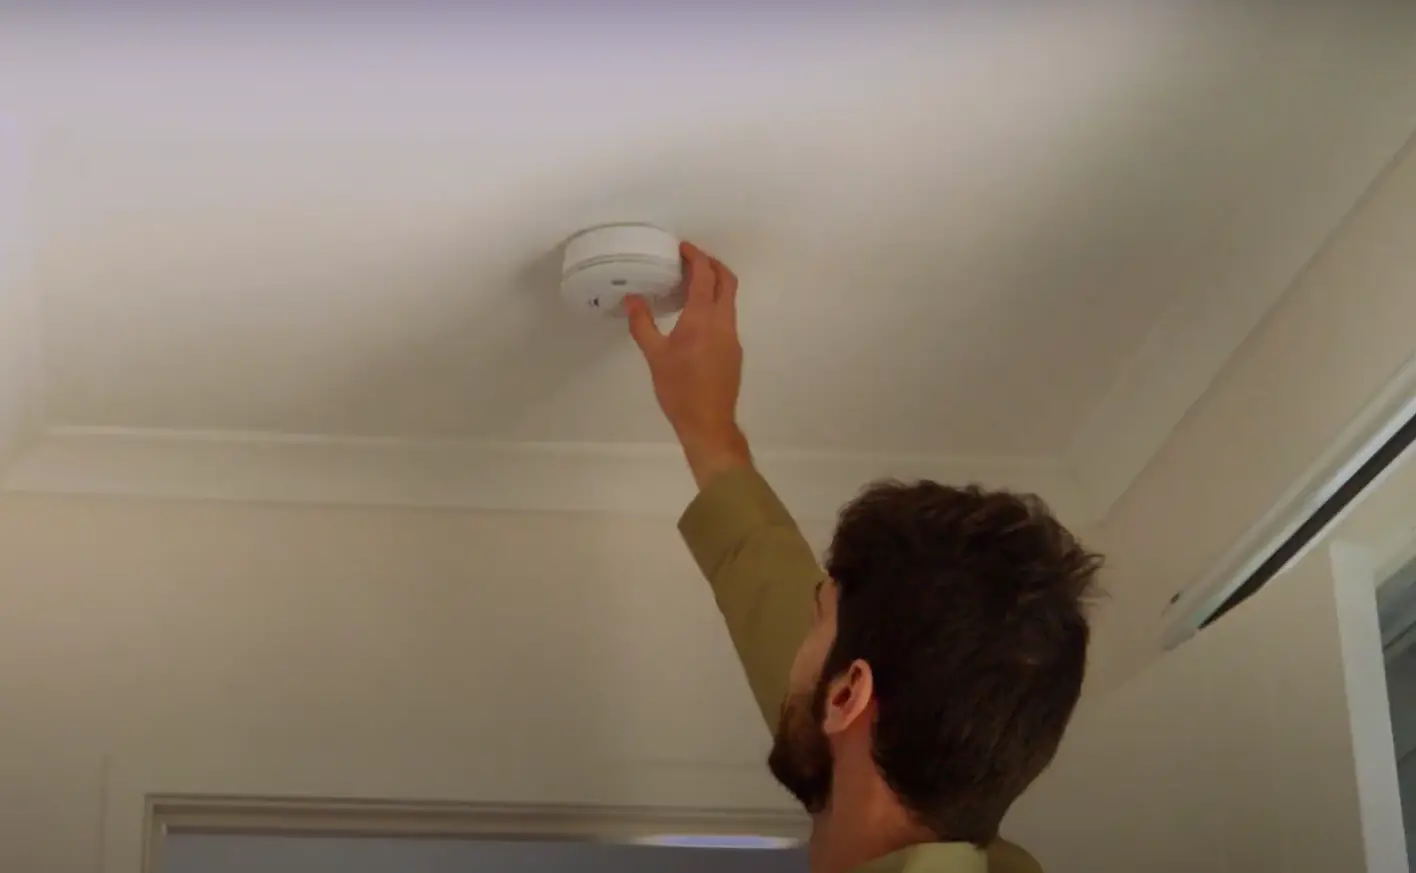 How often should you test your smoke alarm?